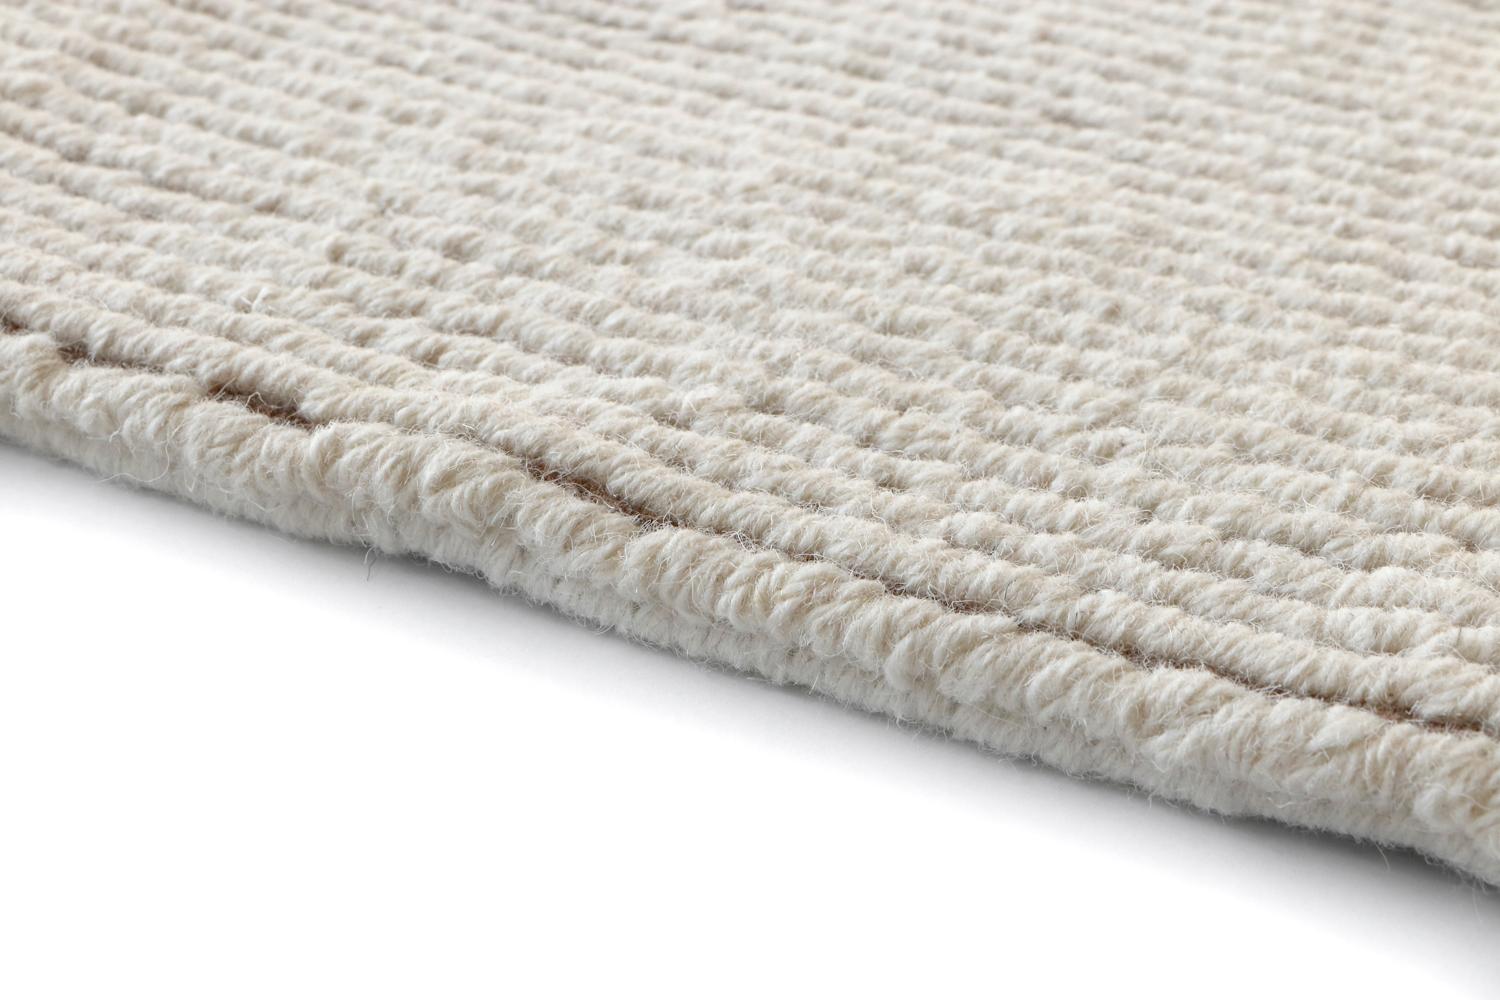 Lanagrossa Modern Rug in Ivory White Pure Wool by Deanna Comellini 170x240 cm 3